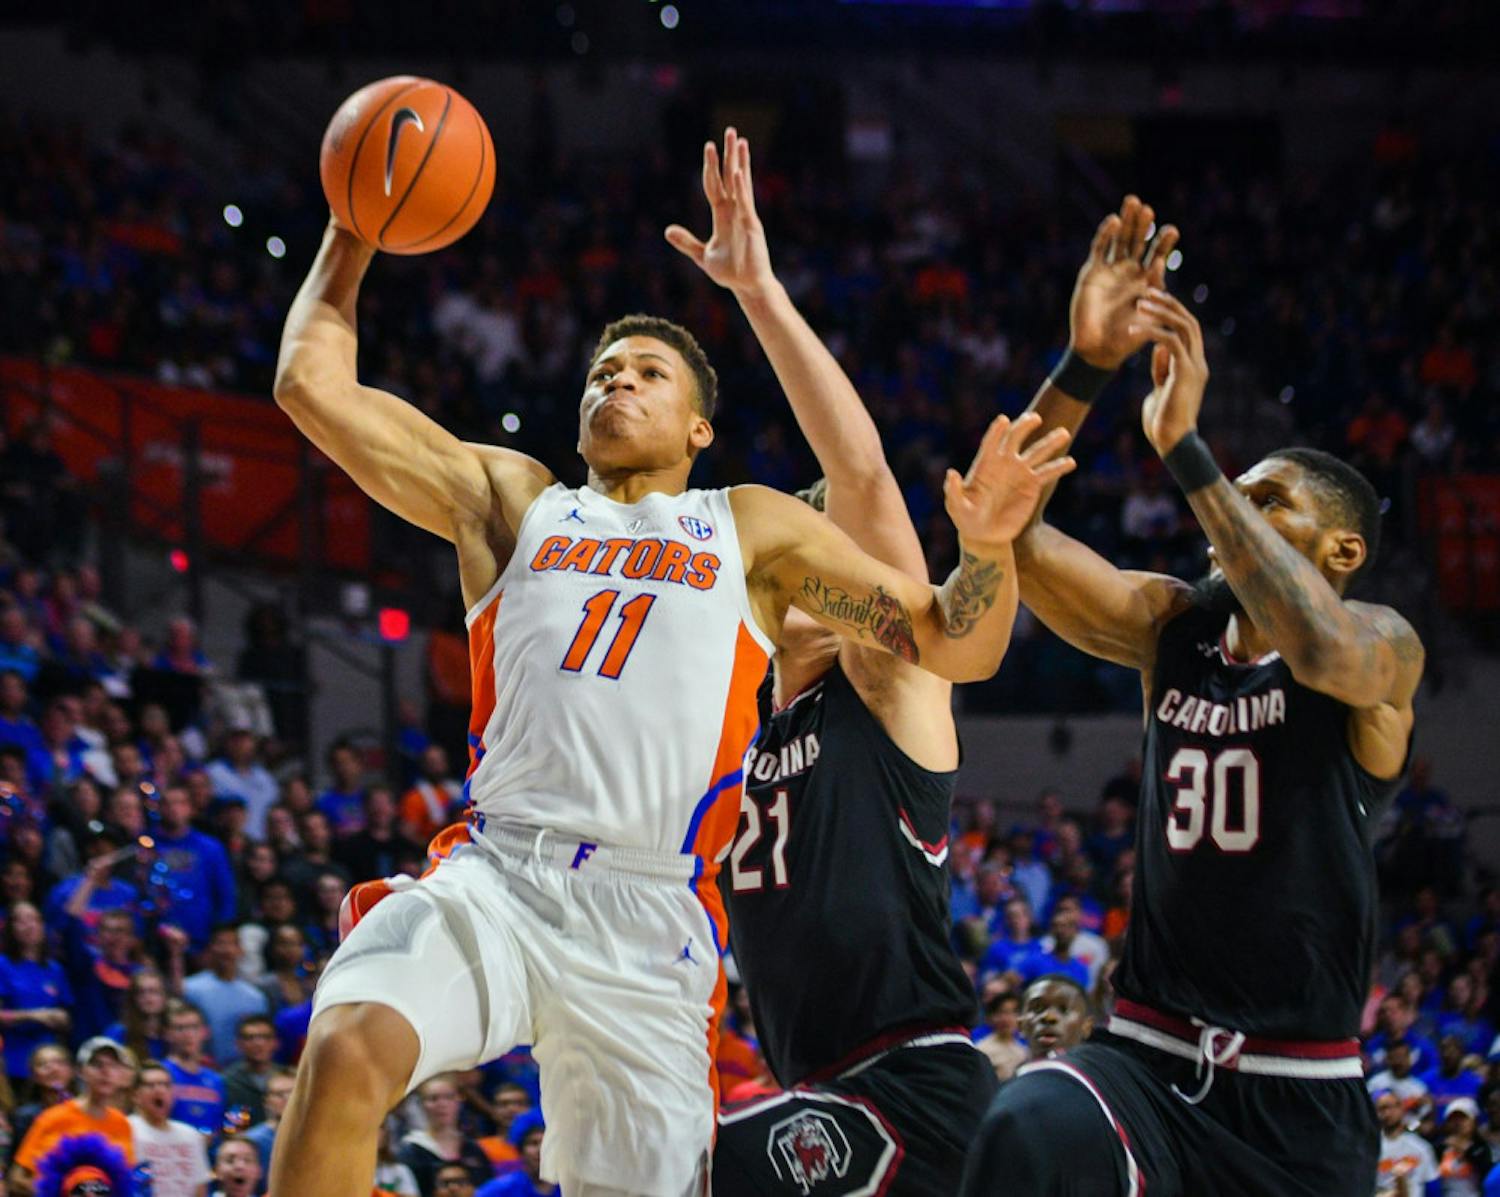 Florida missed&nbsp;eight shots in the final seven minutes of its 69-71 loss to South Carolina, including a missed jumper and layup from freshman guard Keyontae Johnson.